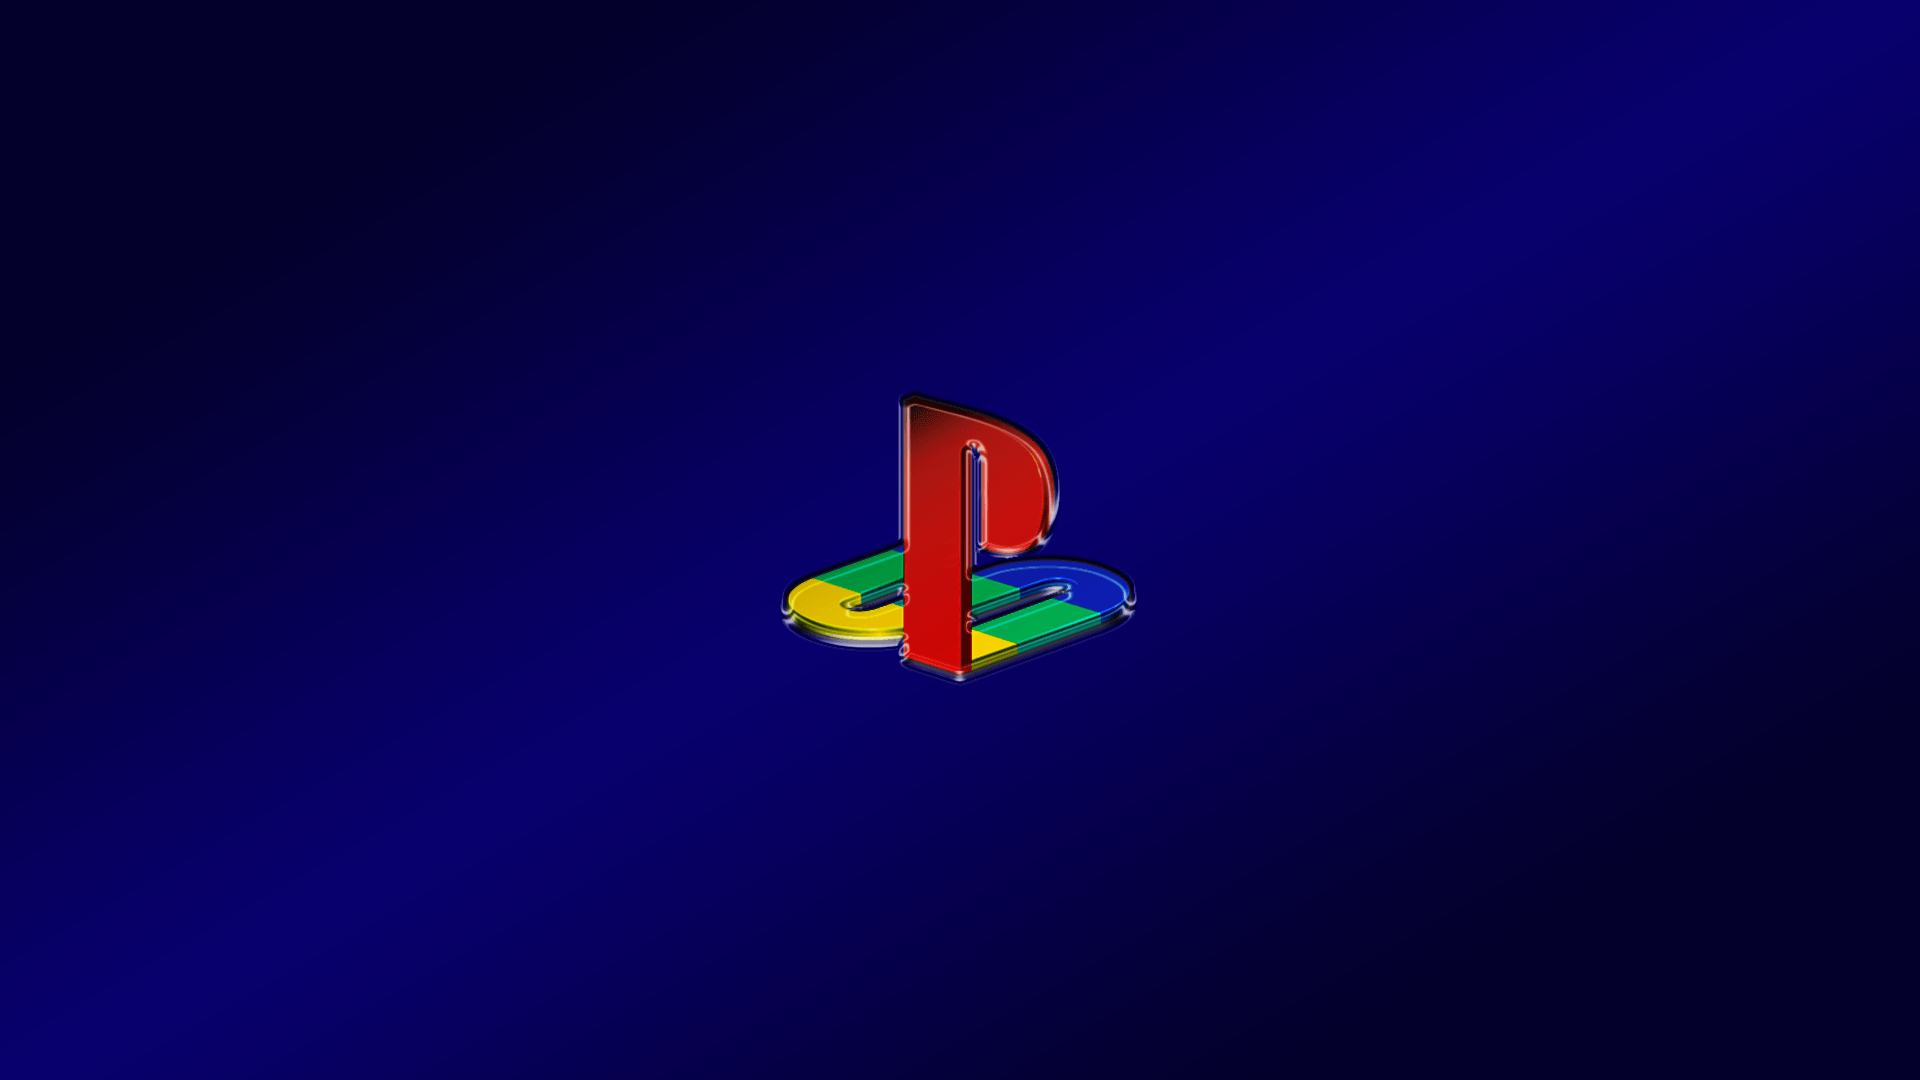 PlayStation Logo Need #iPhone S #Plus #Wallpaper